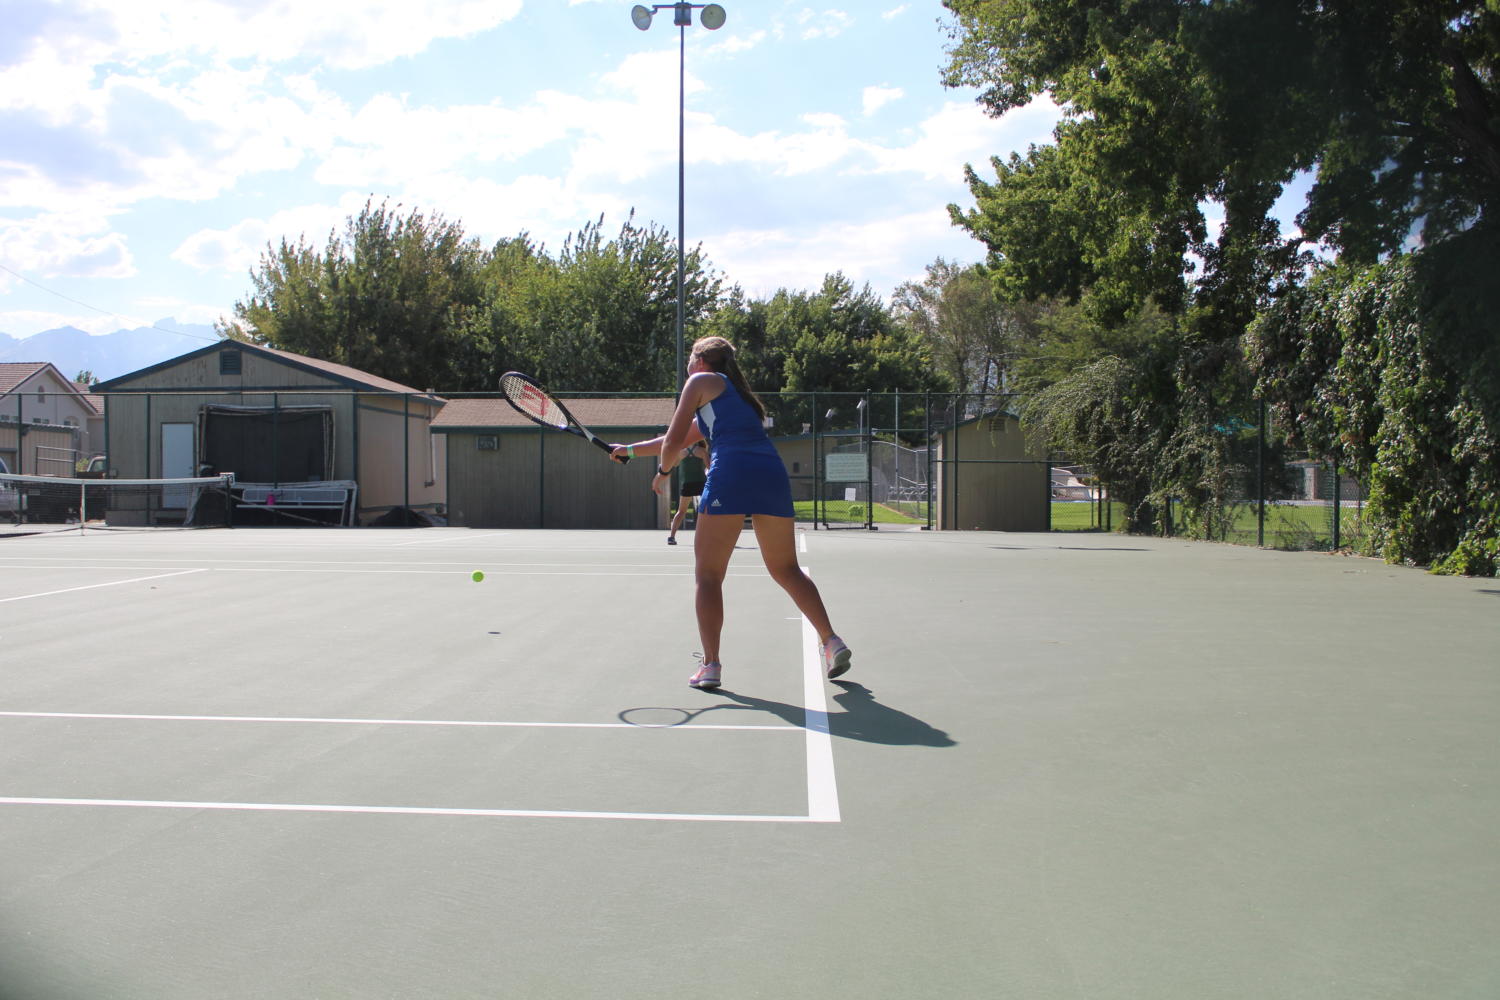 Tami Lee playing a challenging tennis match at the Bishop City Park